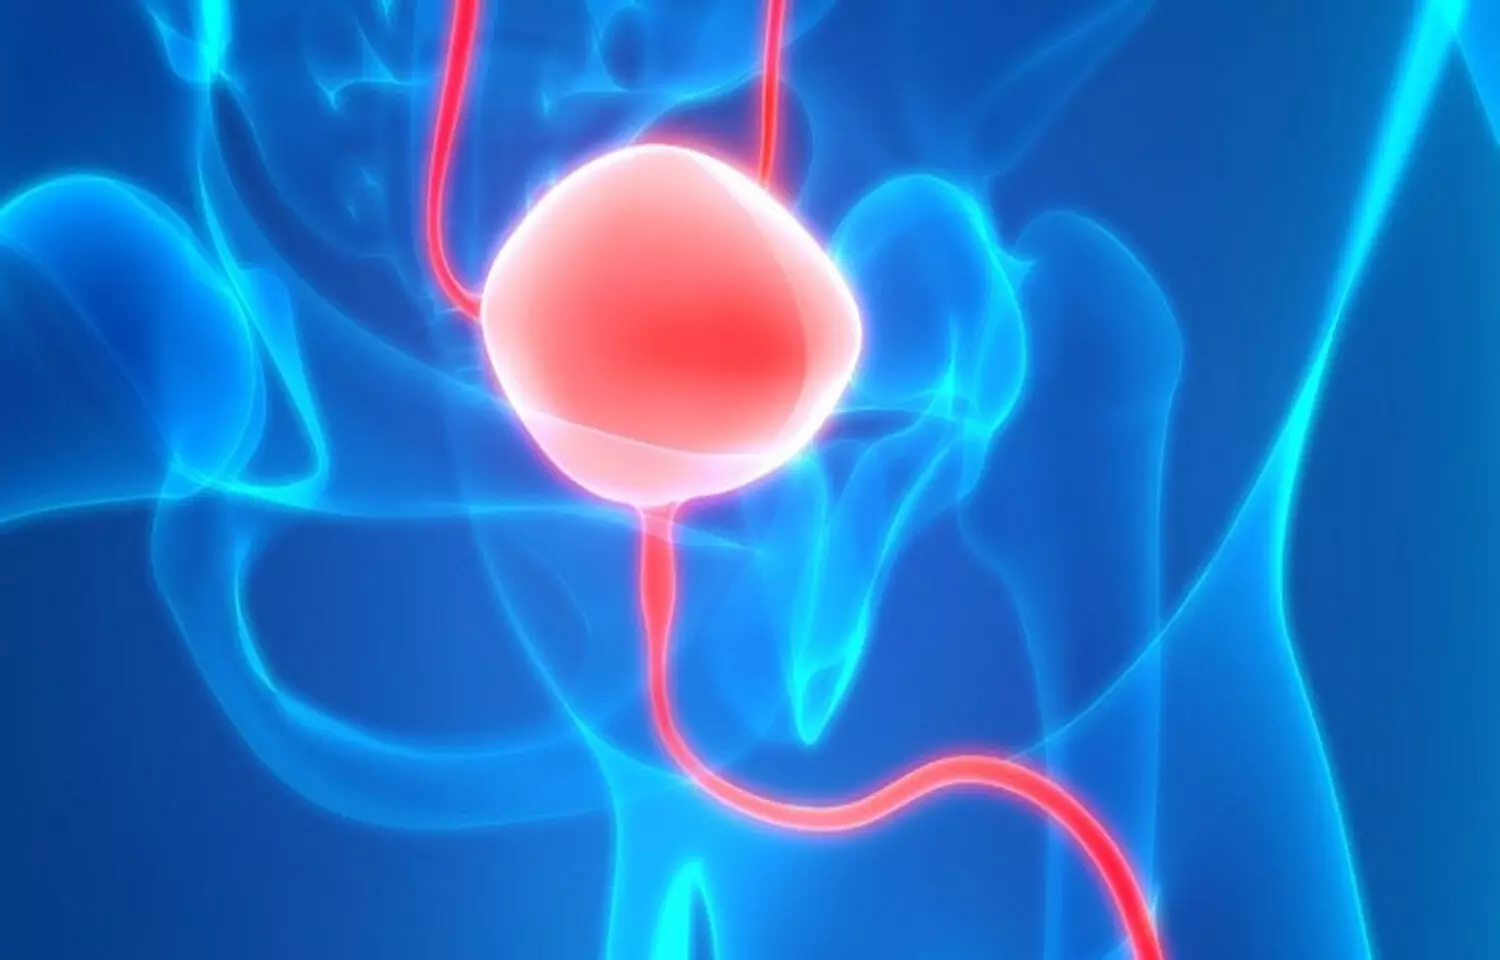 Potential therapy may boost chemoimmunotherapy response in bladder cancer